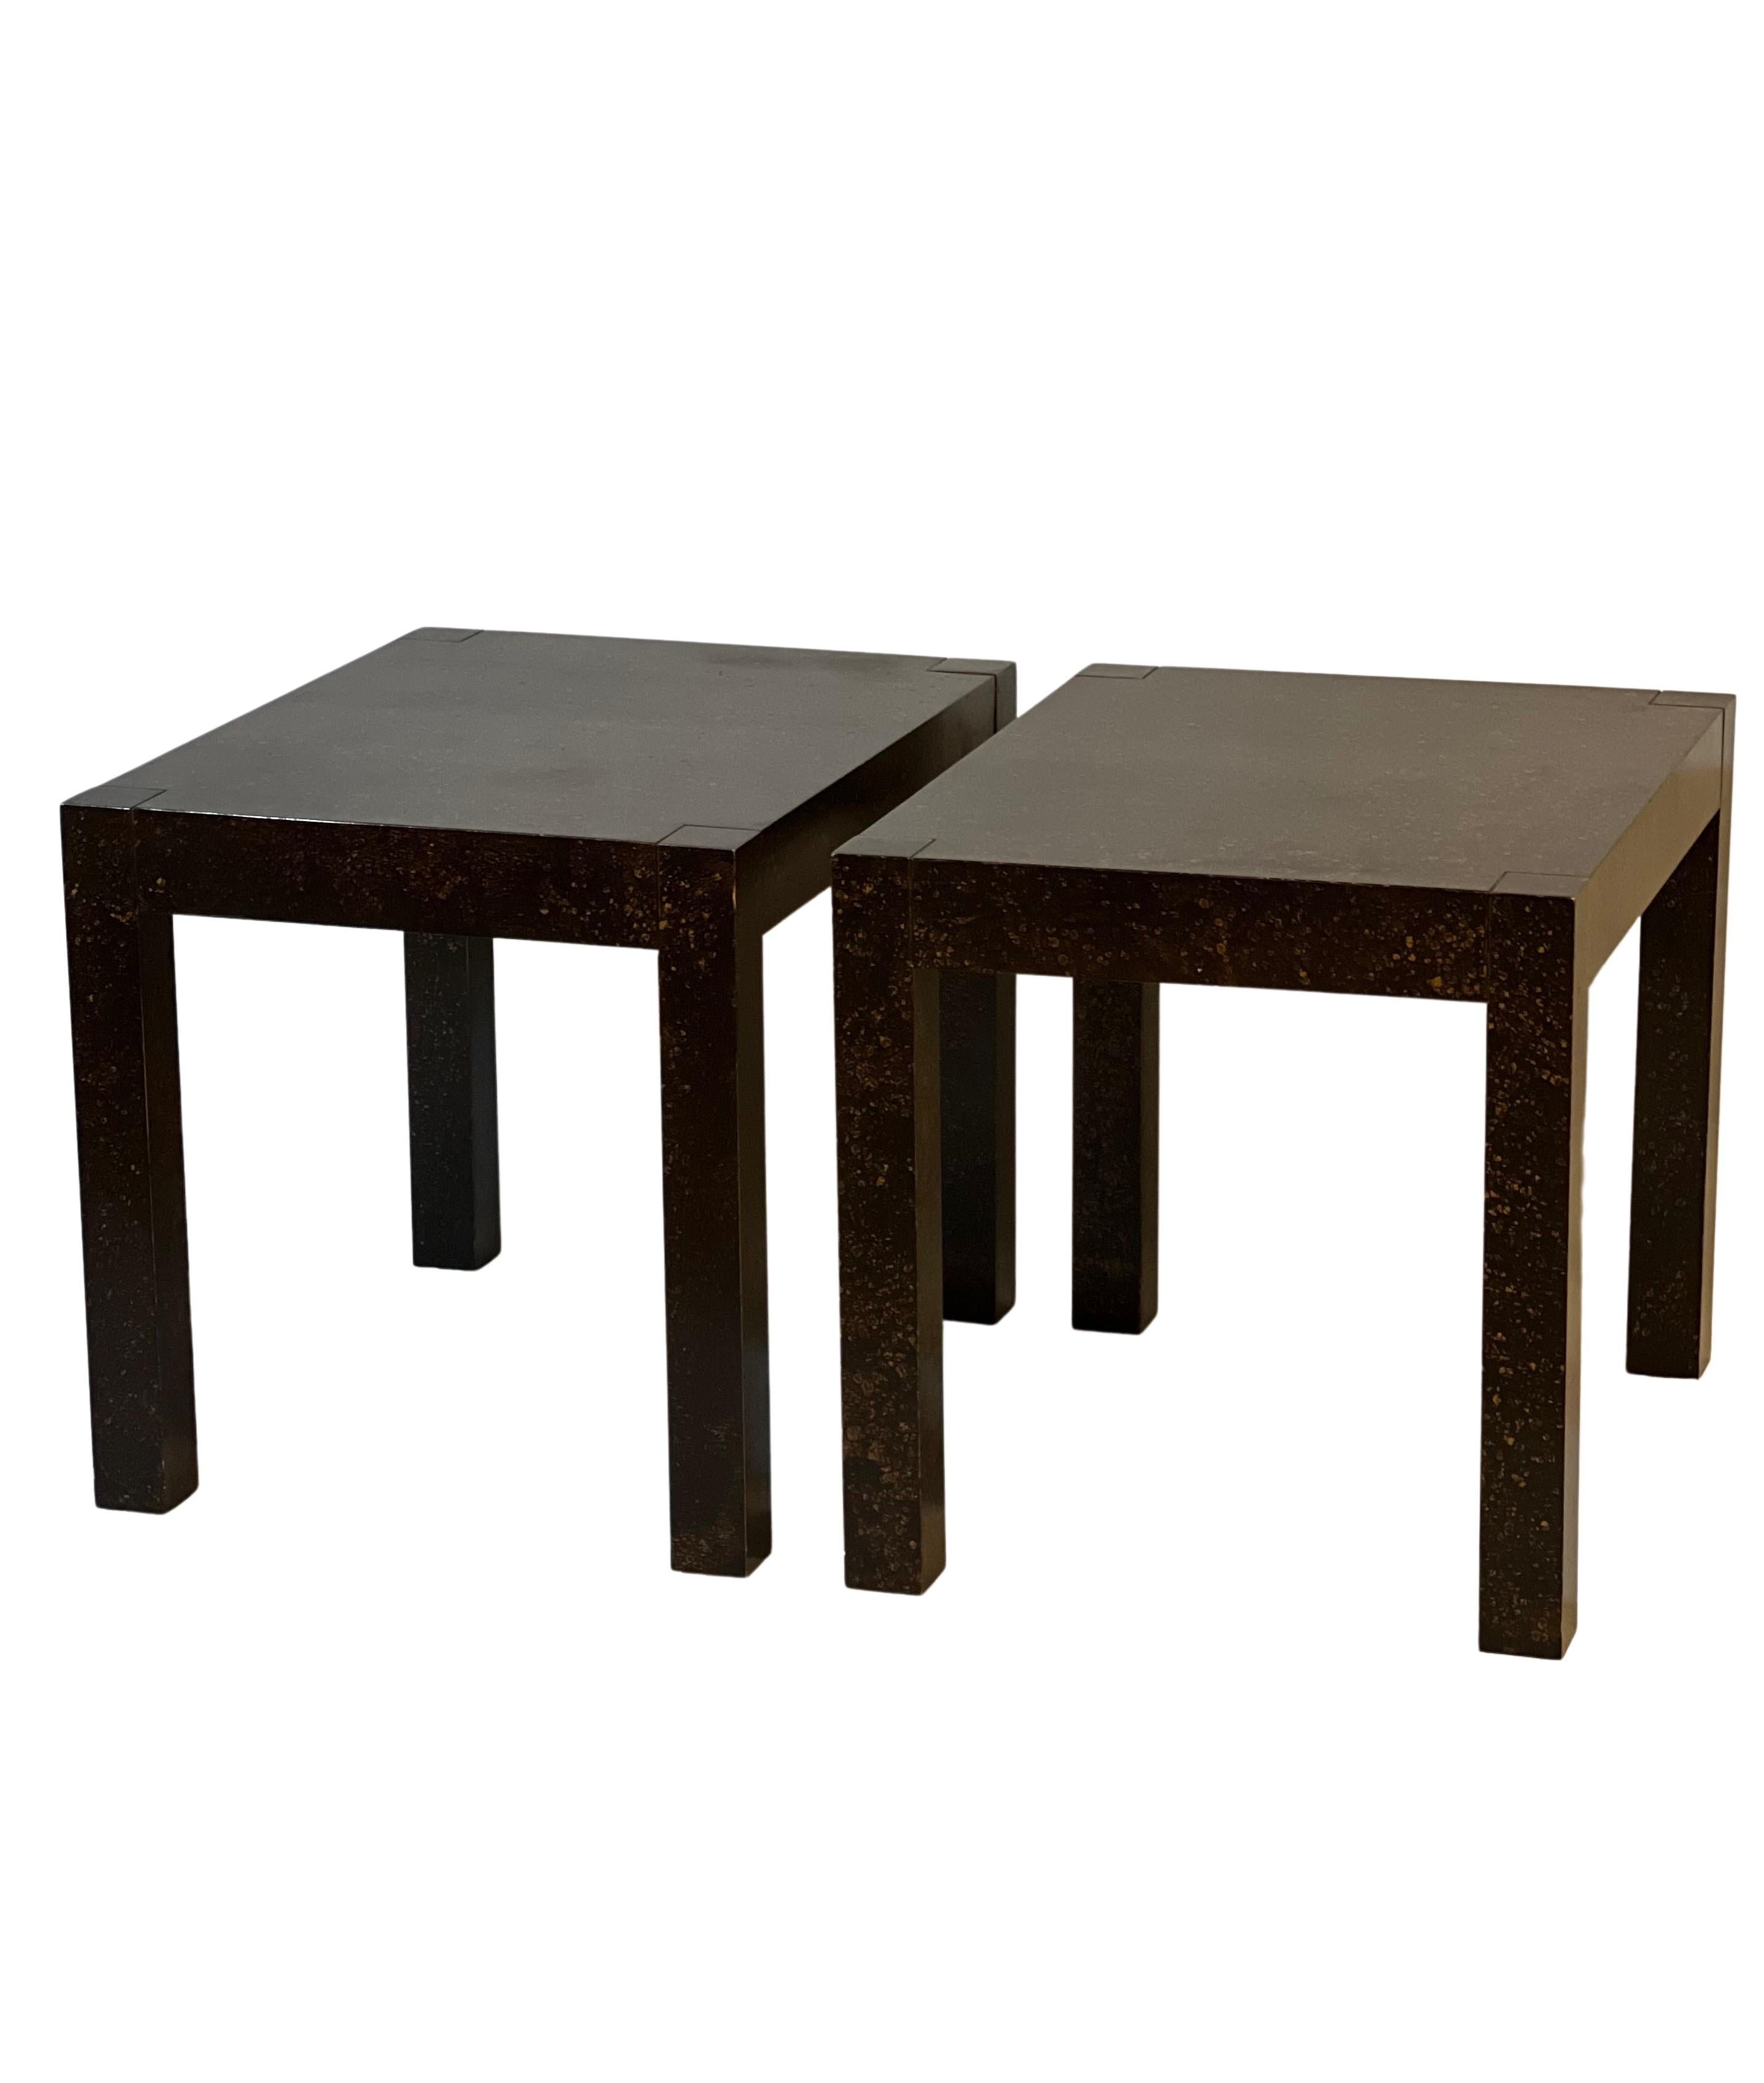 Vintage Drexel Parsons oil drop finish side tables, a pair.

Beautiful pair of side tables with a distinctive oil drop finish.  This technique is characterized by a free-form design of gold speckles or 